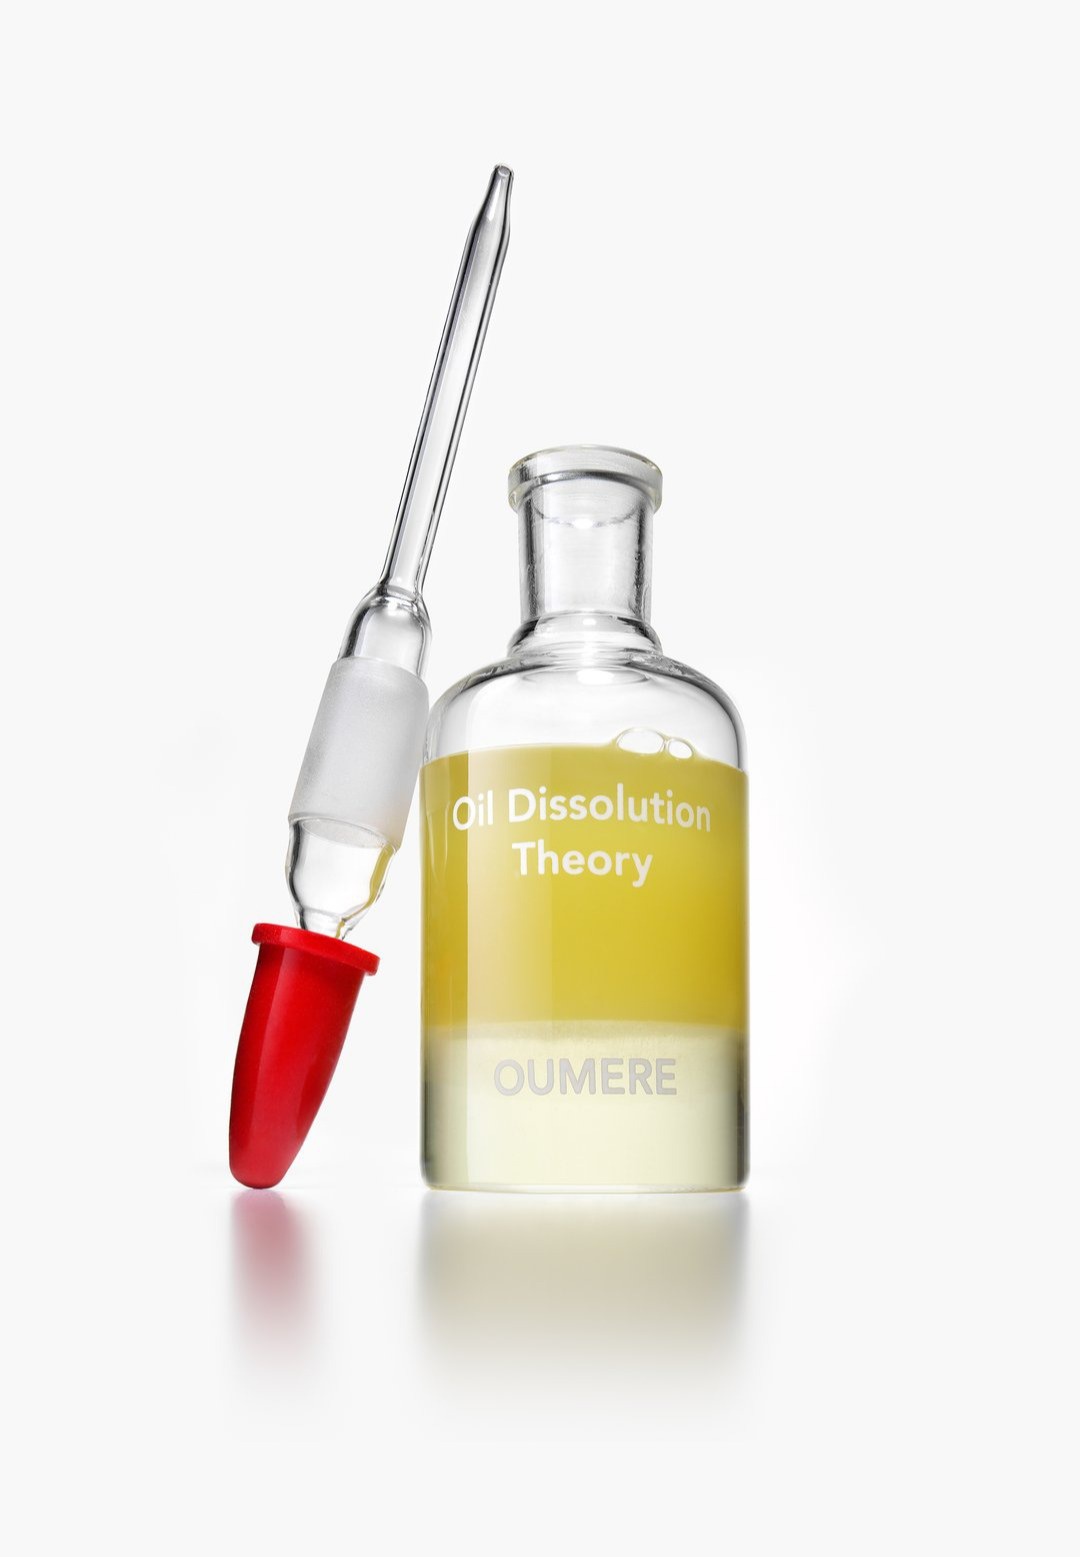 Oumere Oil Dissolution Theory™